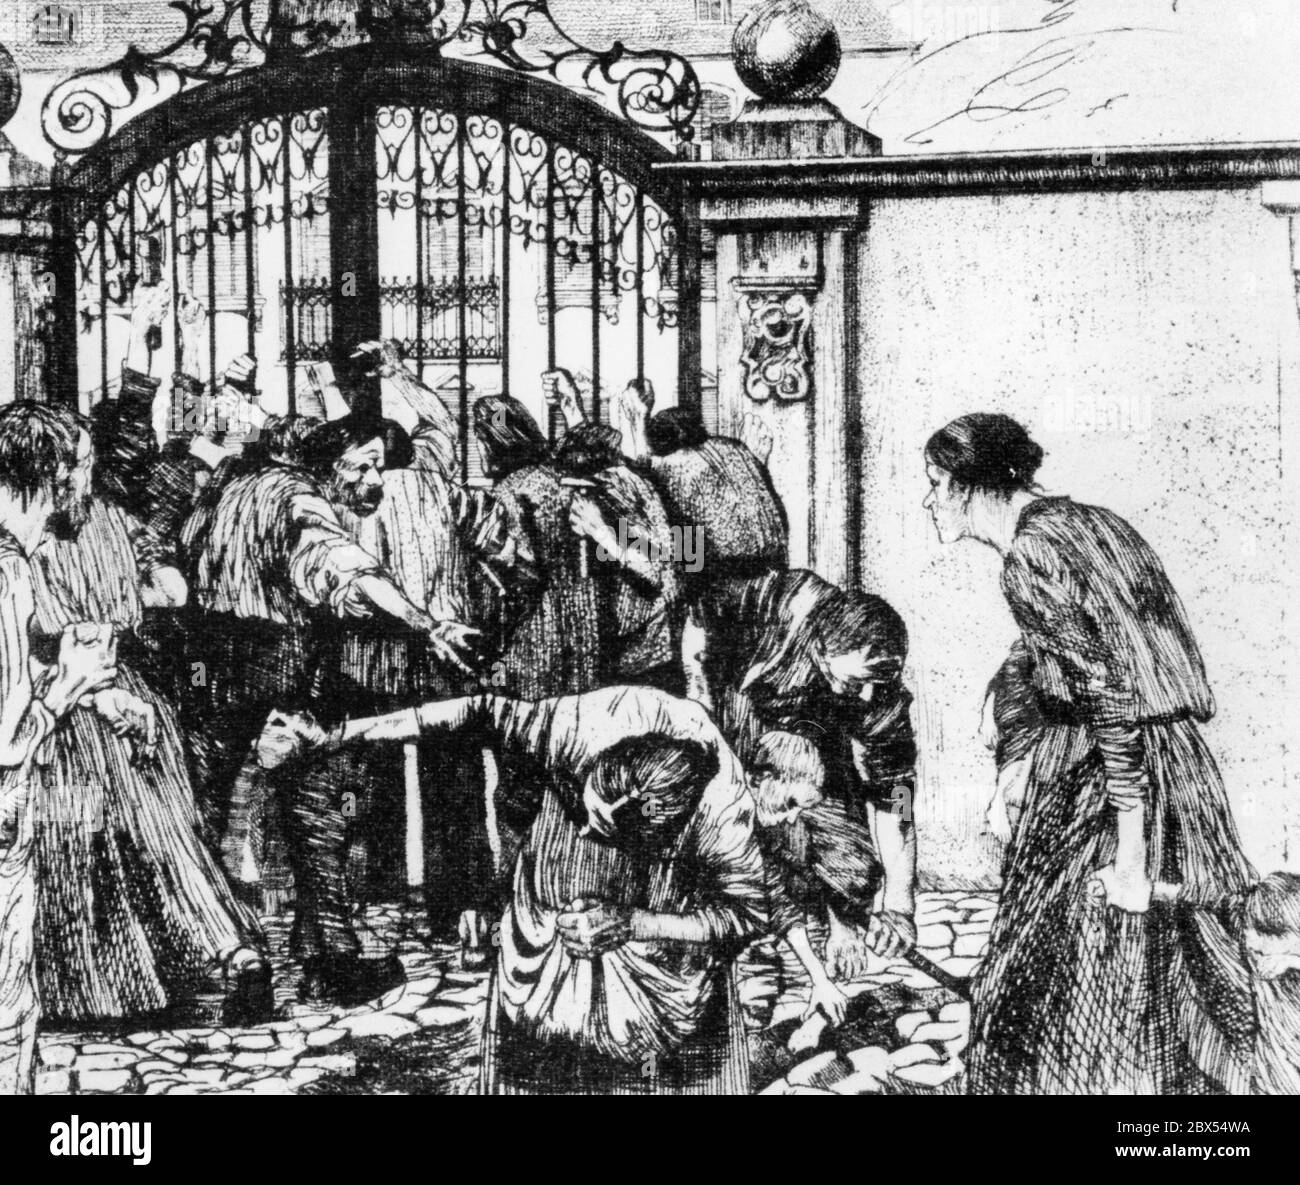 Silesian weavers are protesting in front of a house. They beat the iron gate with axes and fists. The weavers lost their jobs due to industrialisation. Some of them are doing roadwork in the front right. Drawing by Kaethe Kollwitz. Stock Photo